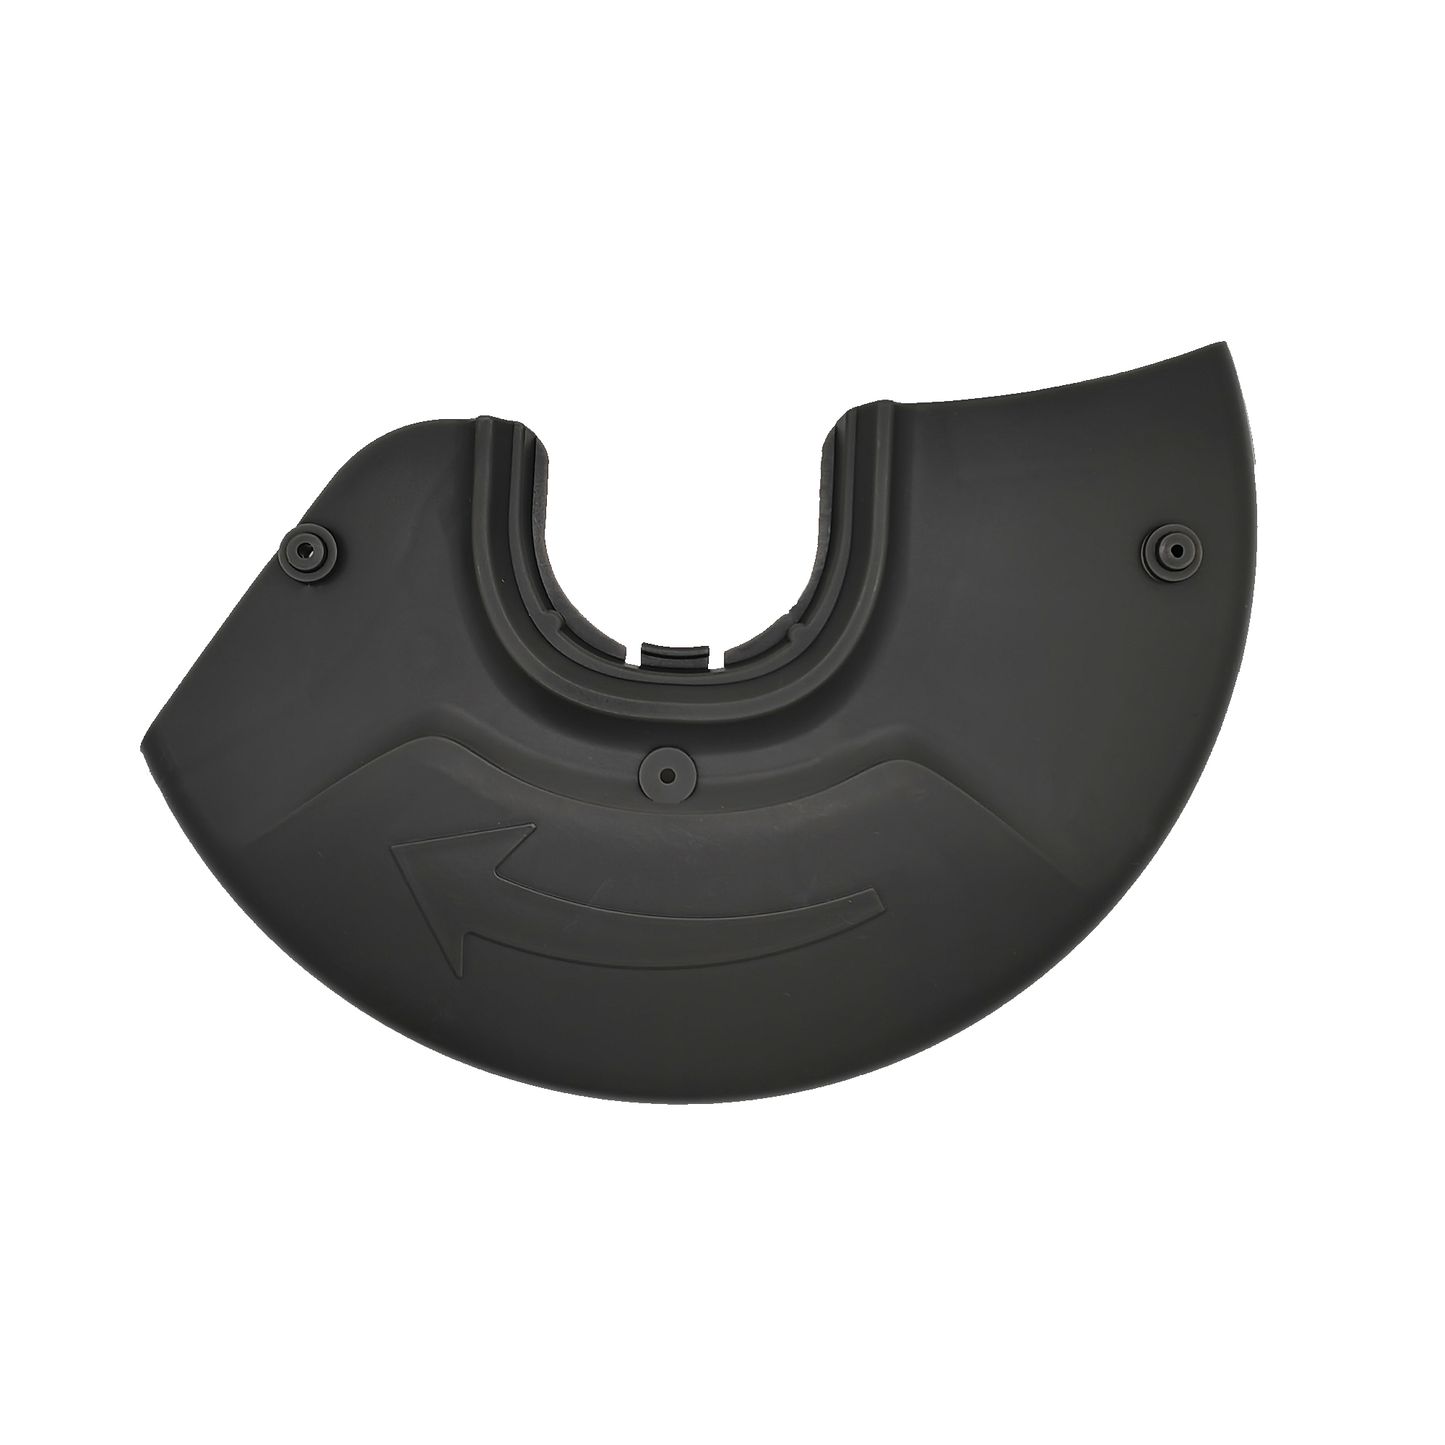 PATIOX Weed Wacker Replacement Cover